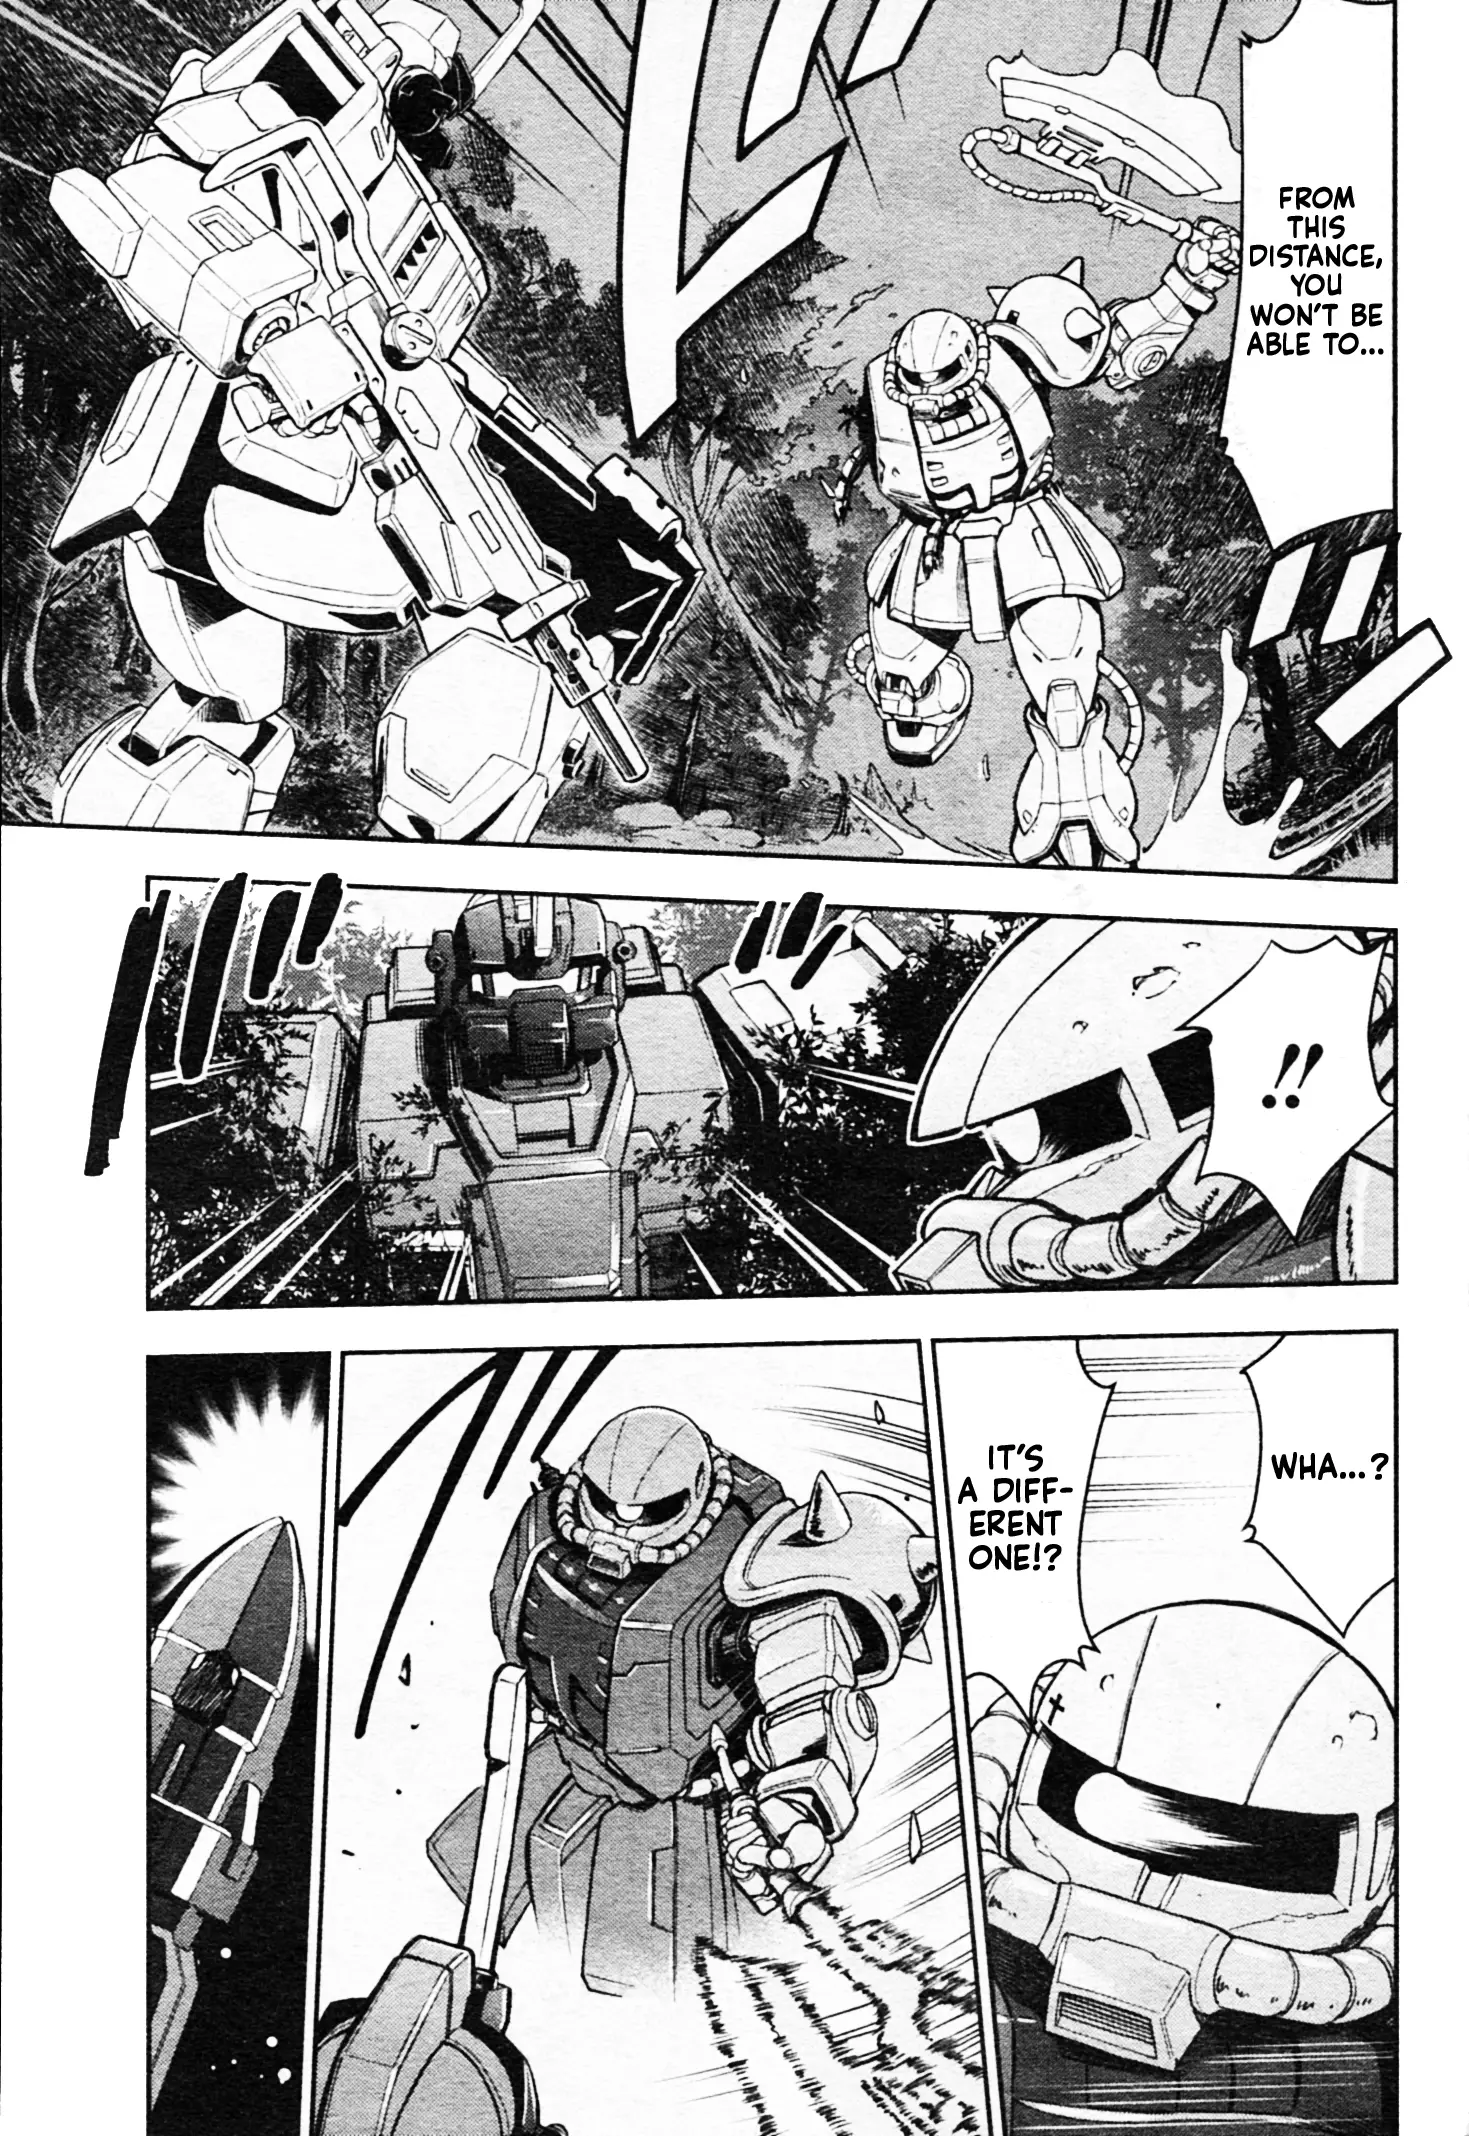 Mobile Suit Gundam: Red Giant 03Rd Ms Team - 1 page 10-bf00d277